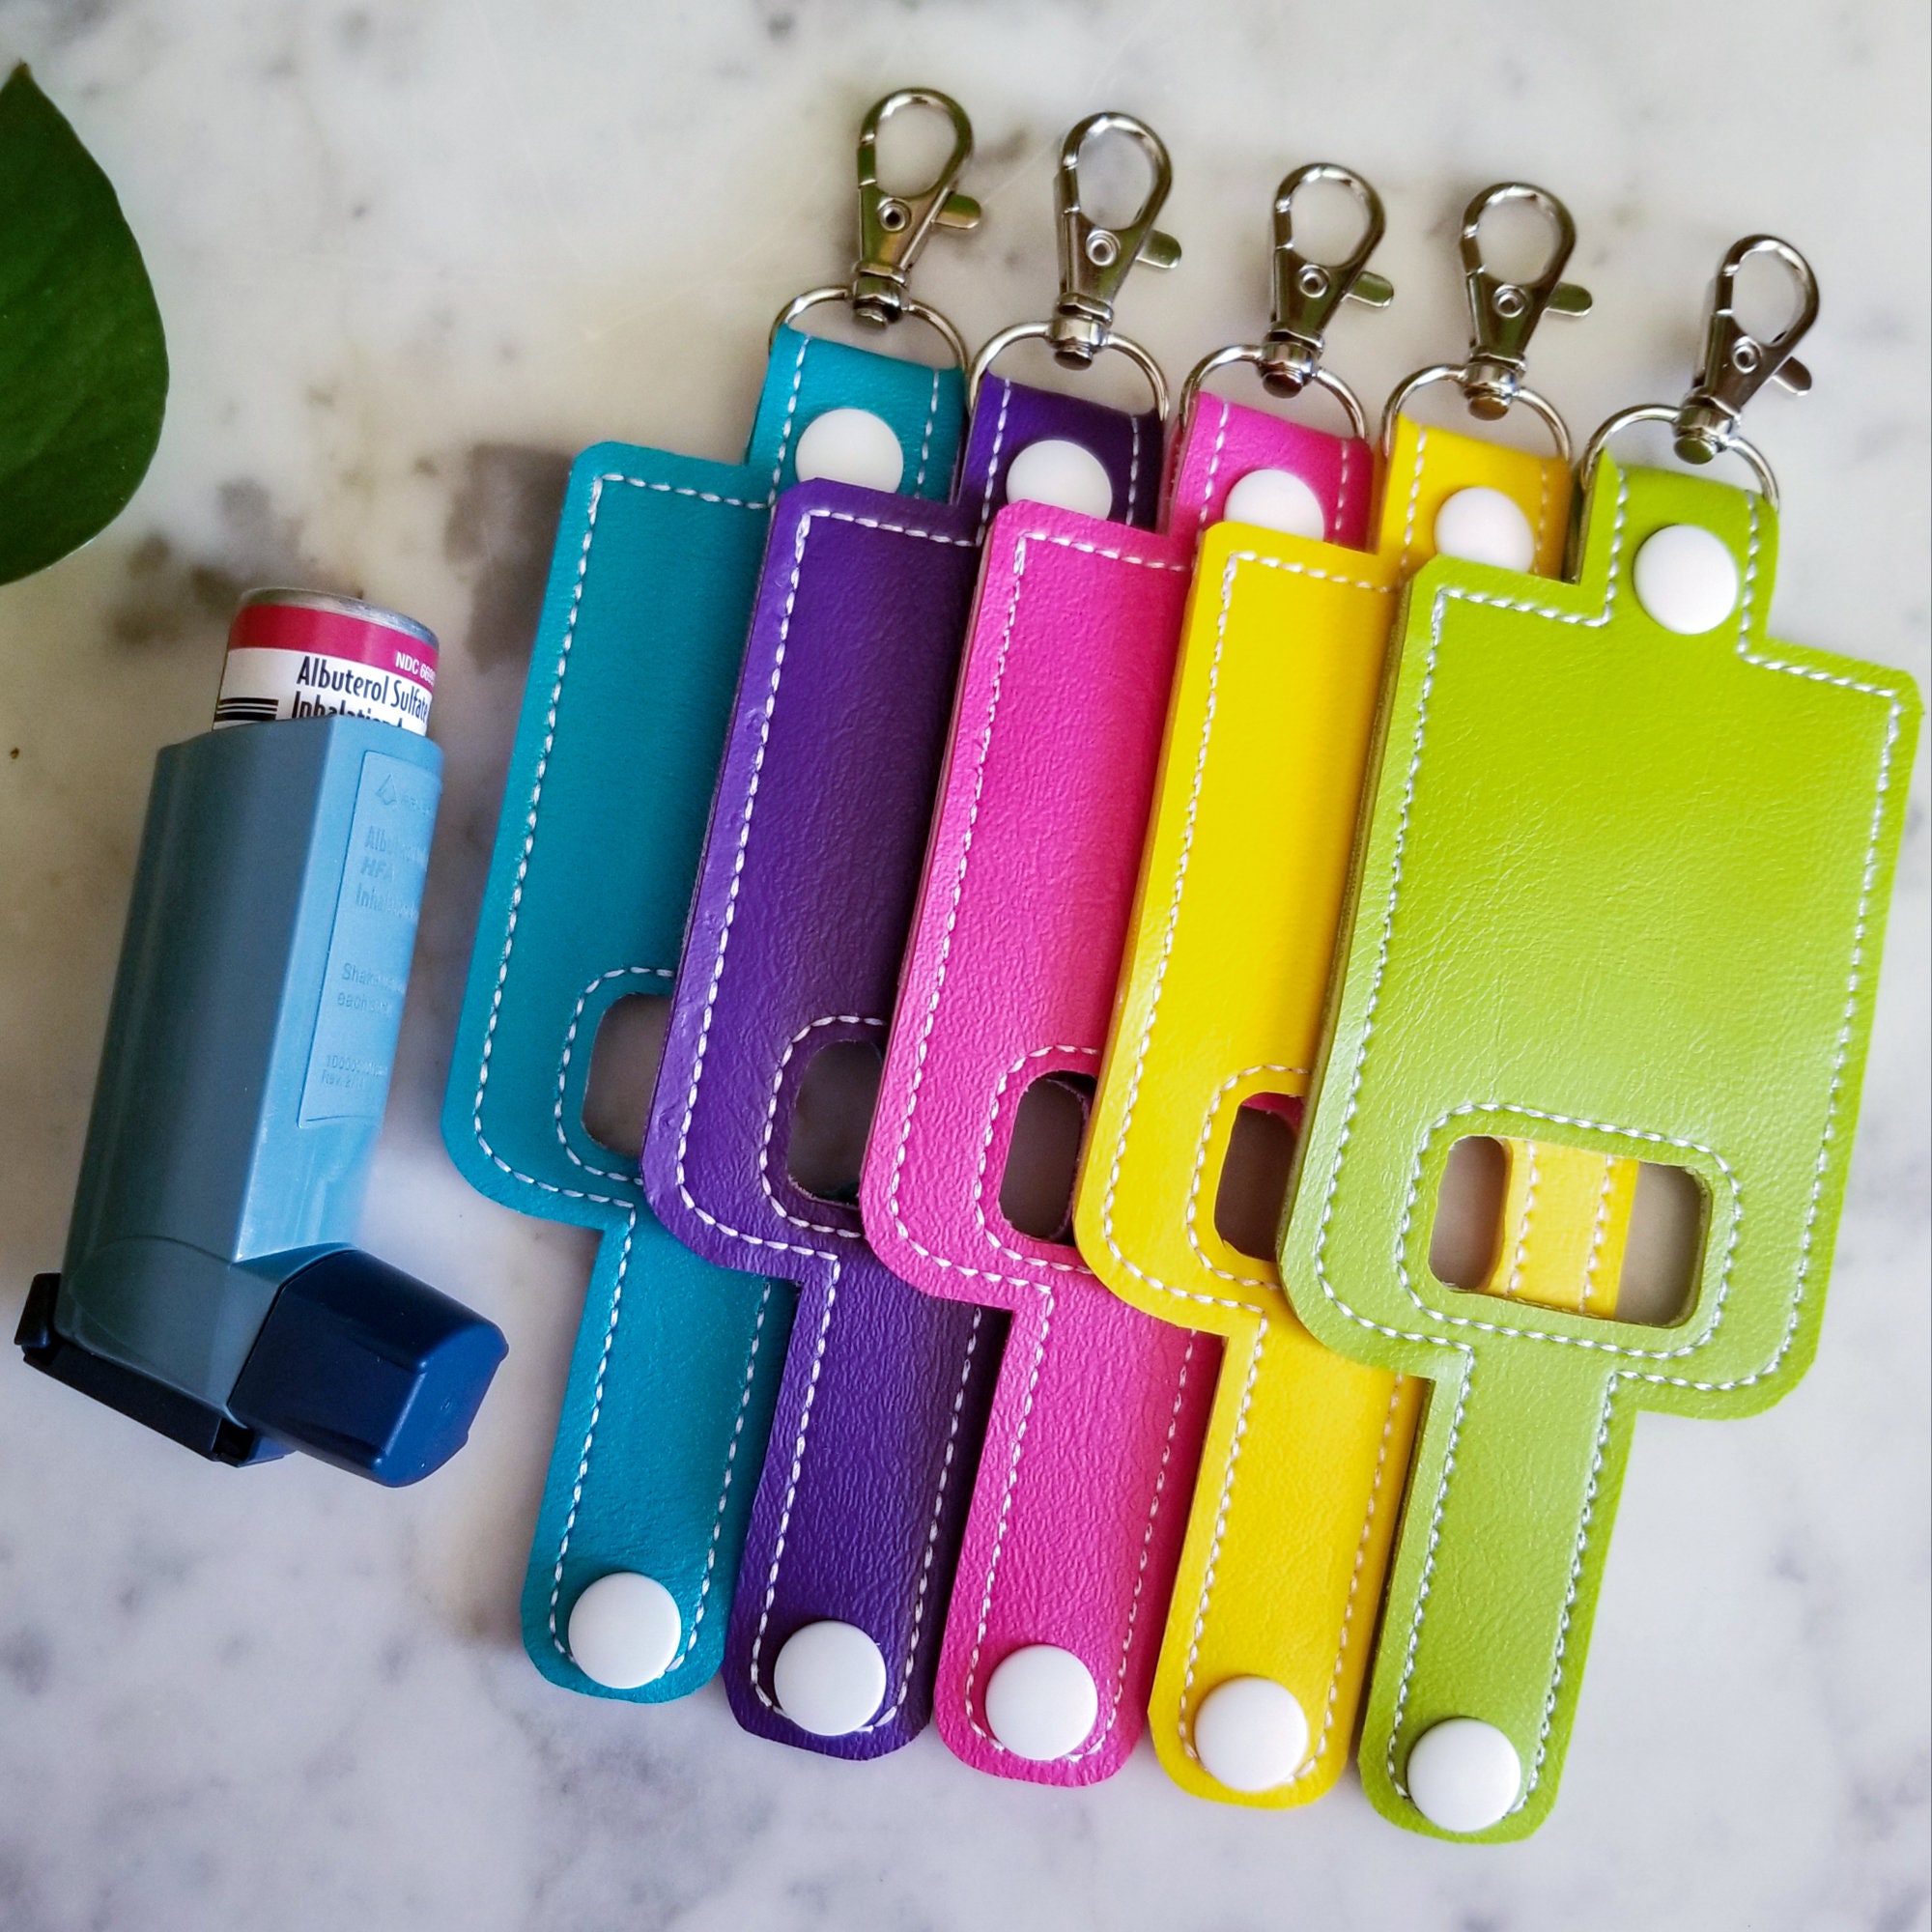 Inhaler Holder SHIPS FREE Cats Bright Keyring with clip $ to rescue - Key  Chains & Lanyards - Medford, New York, Facebook Marketplace